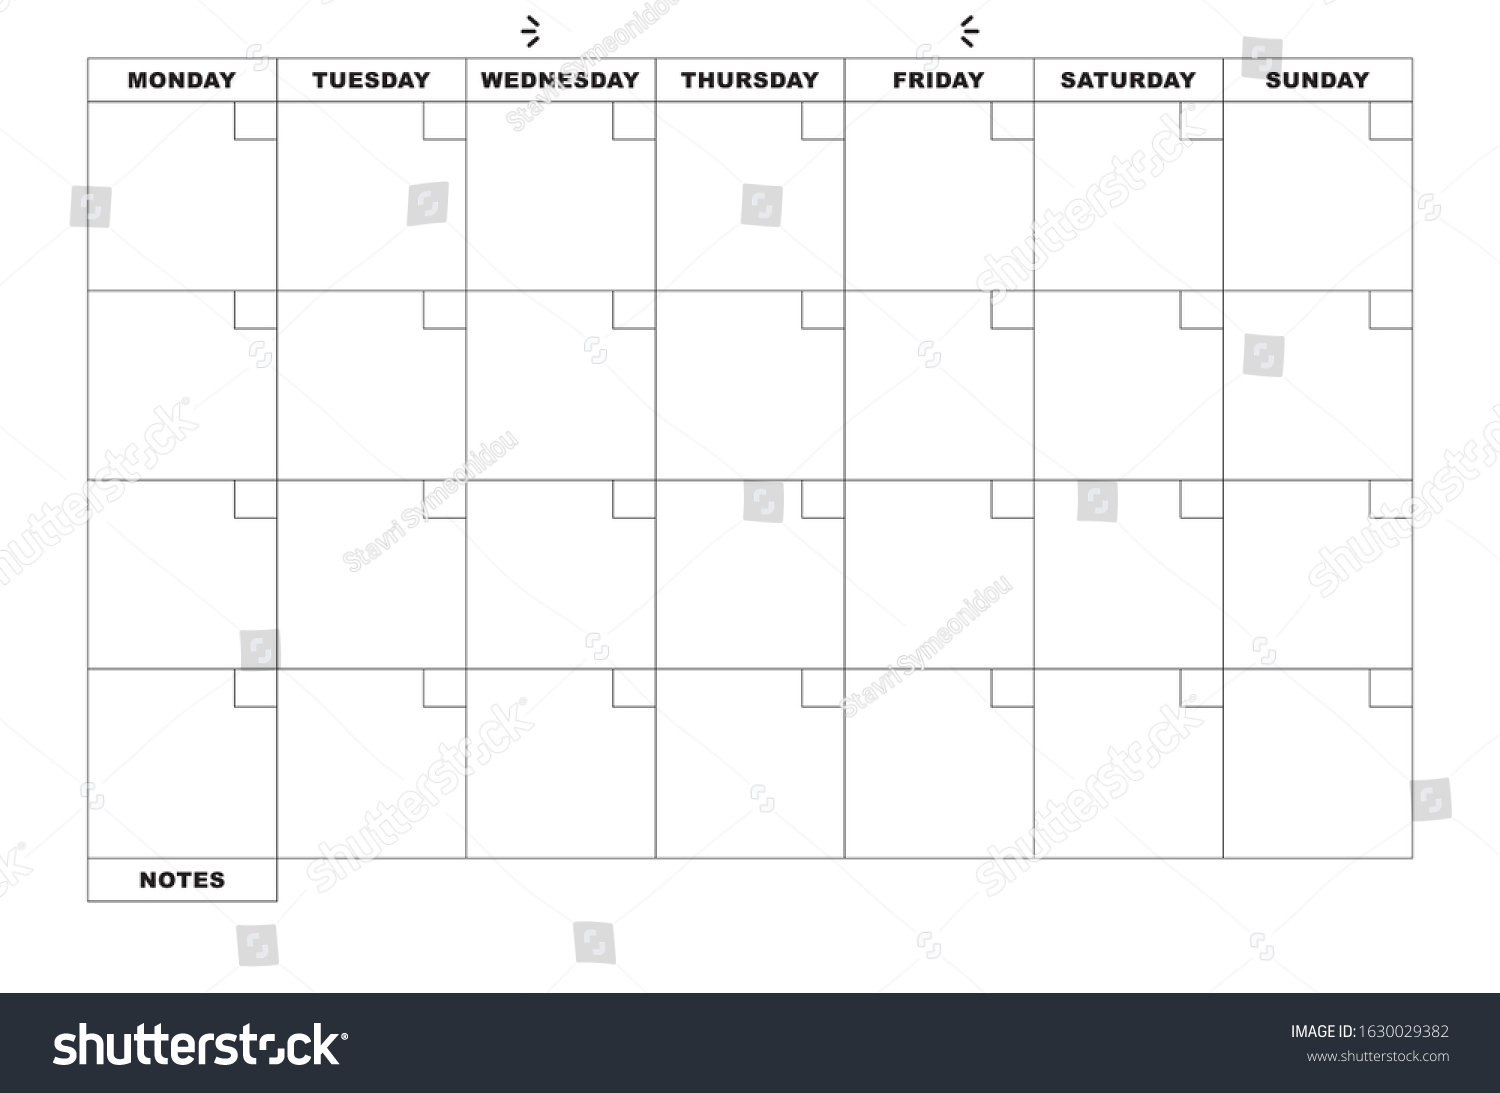 minimal-monthly-calendar-without-dates-1630029382-shutterstock